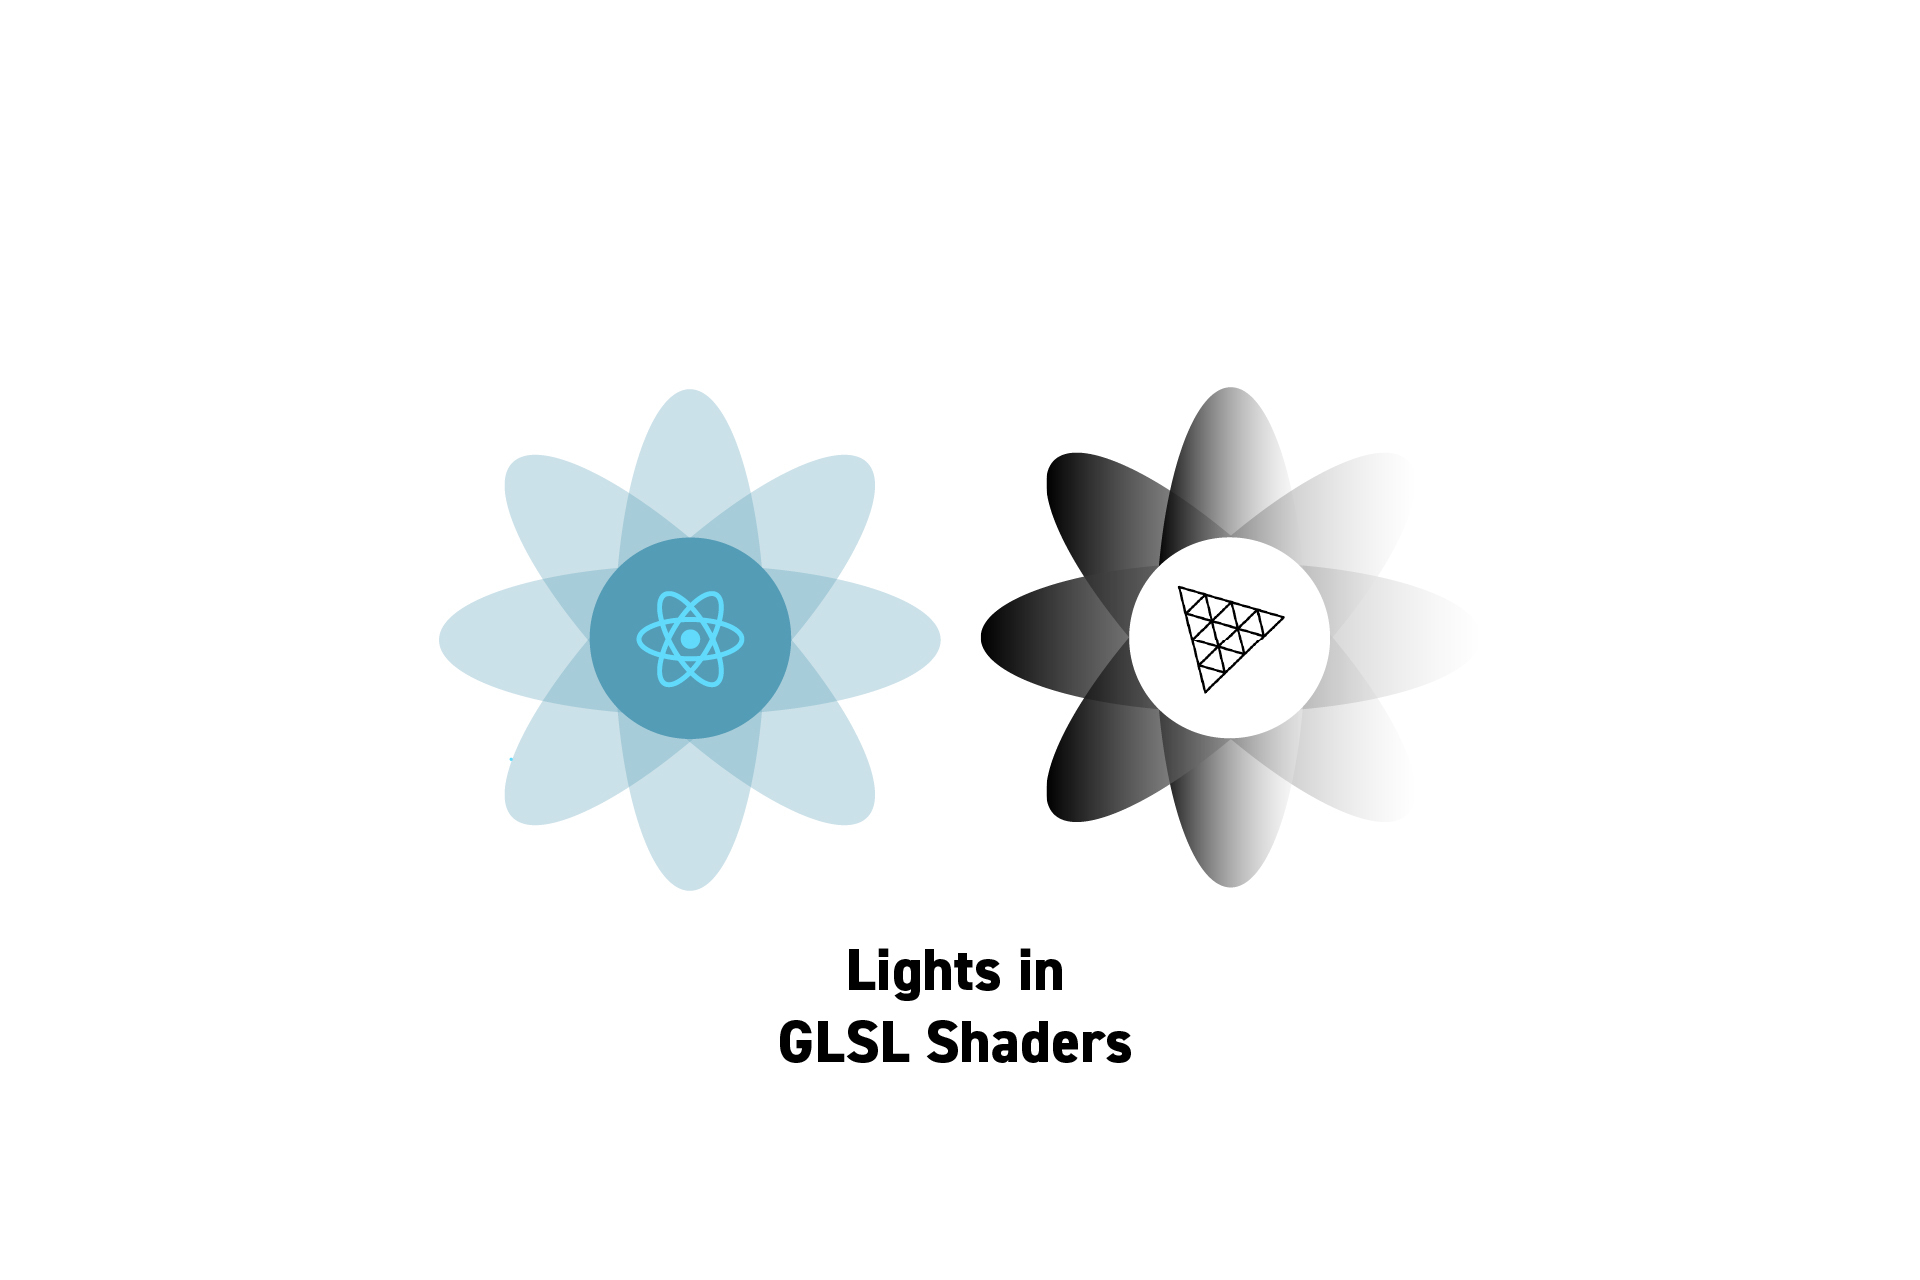 A guide for creating lights in GLSL shaders